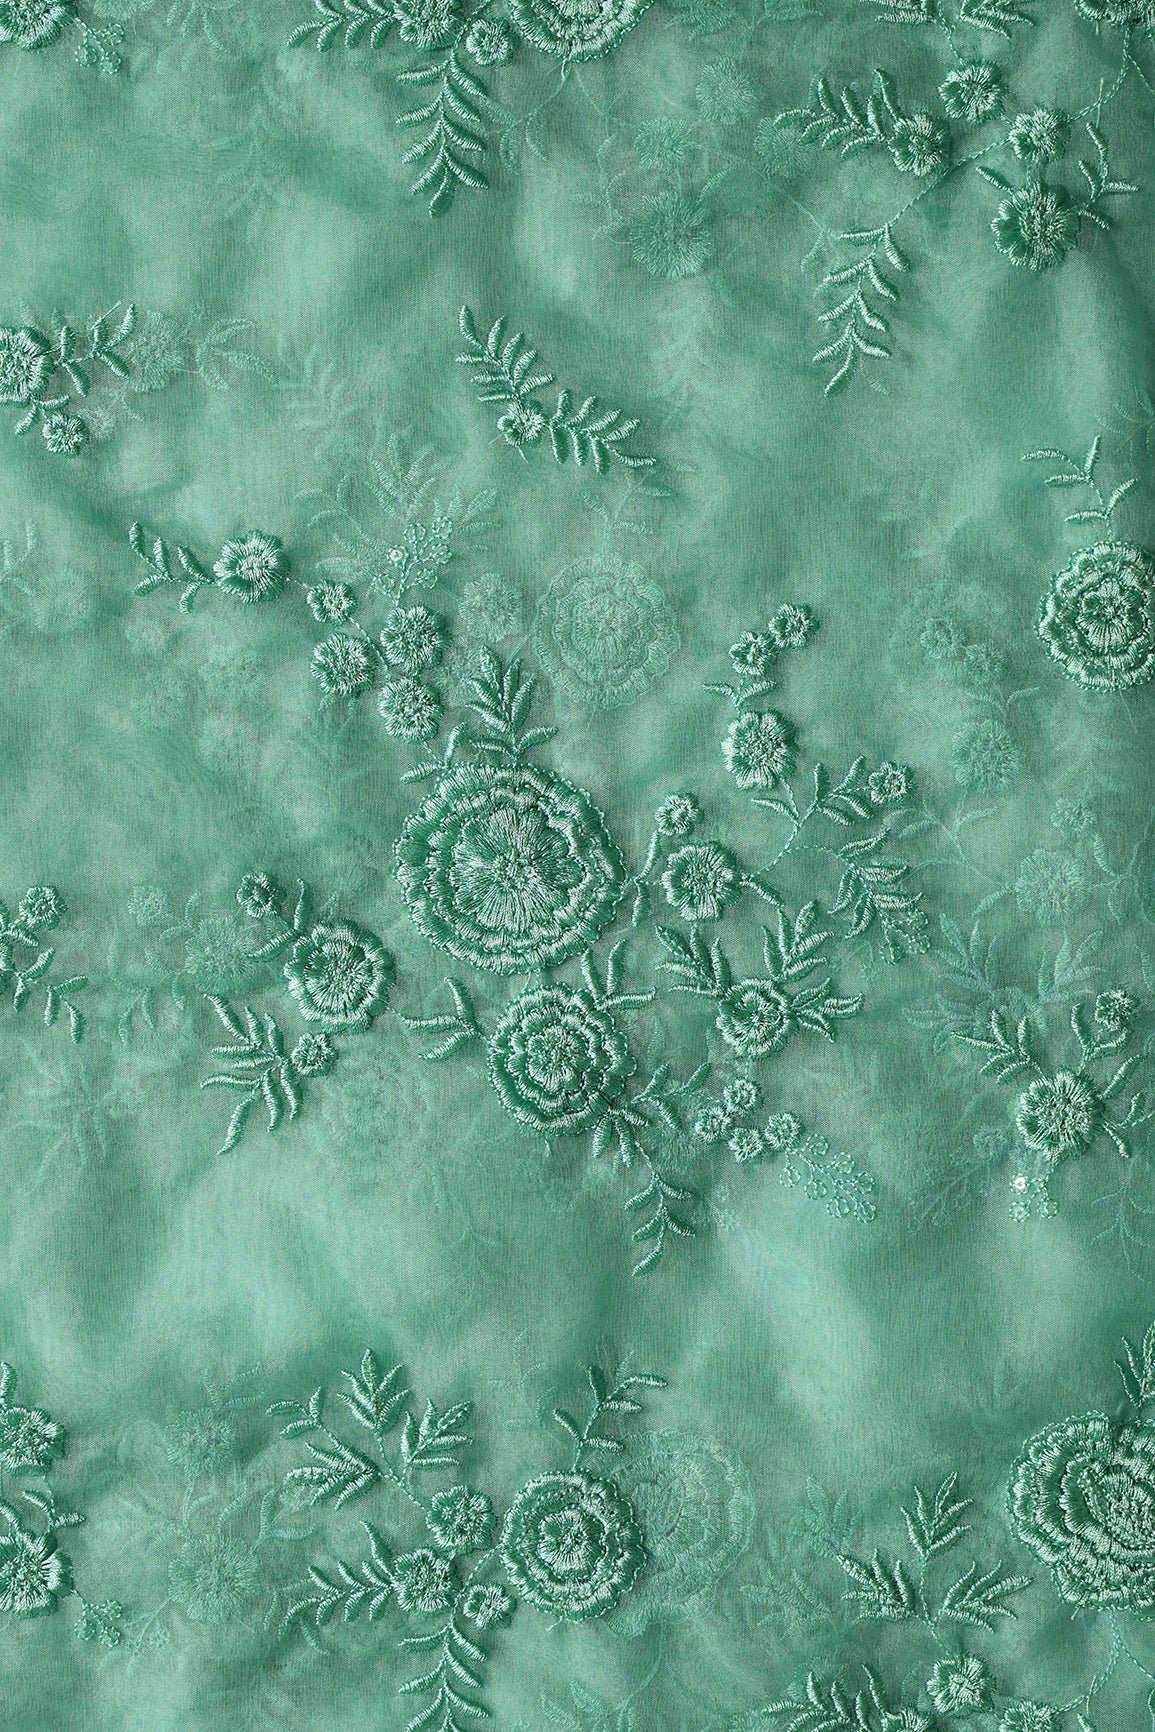 Elegant Floral Thread With Water Sequins Embroidery On Teal Organza Fabric - doeraa